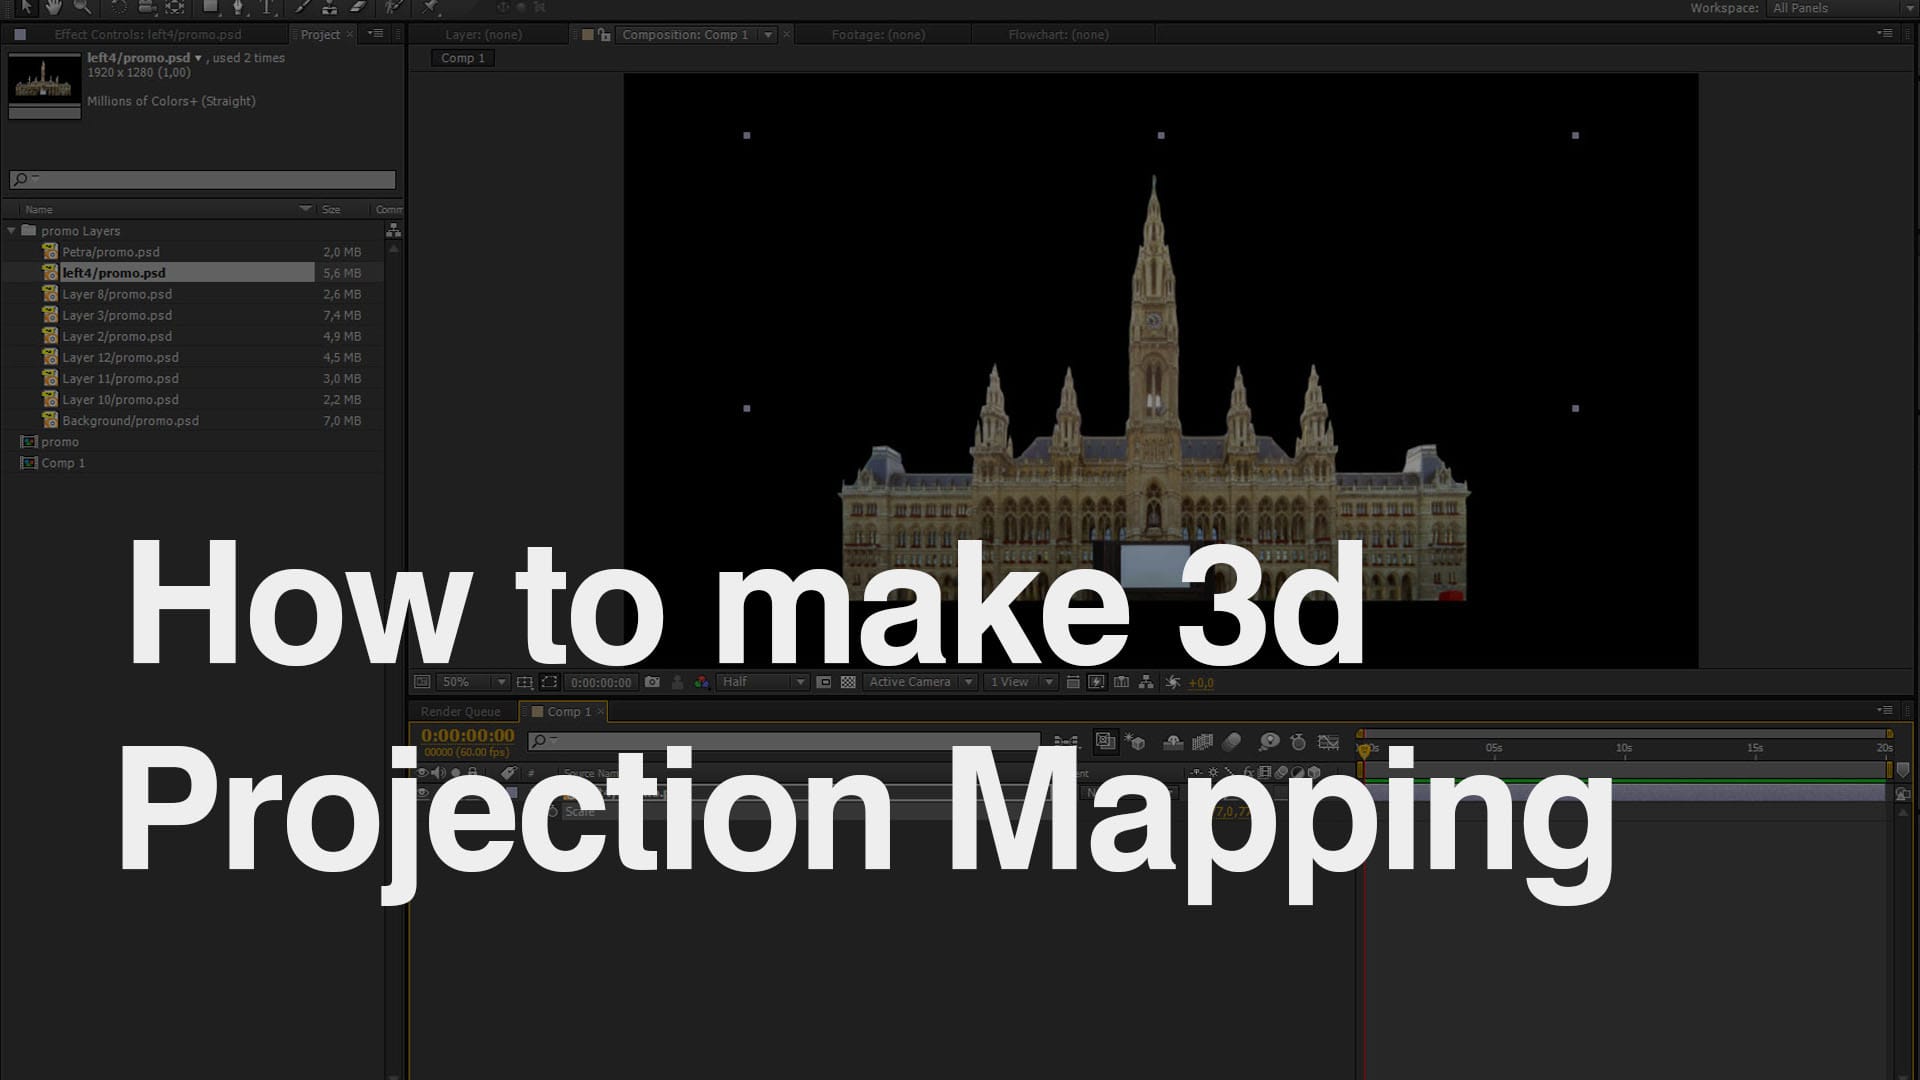 Projection Mapping Videos